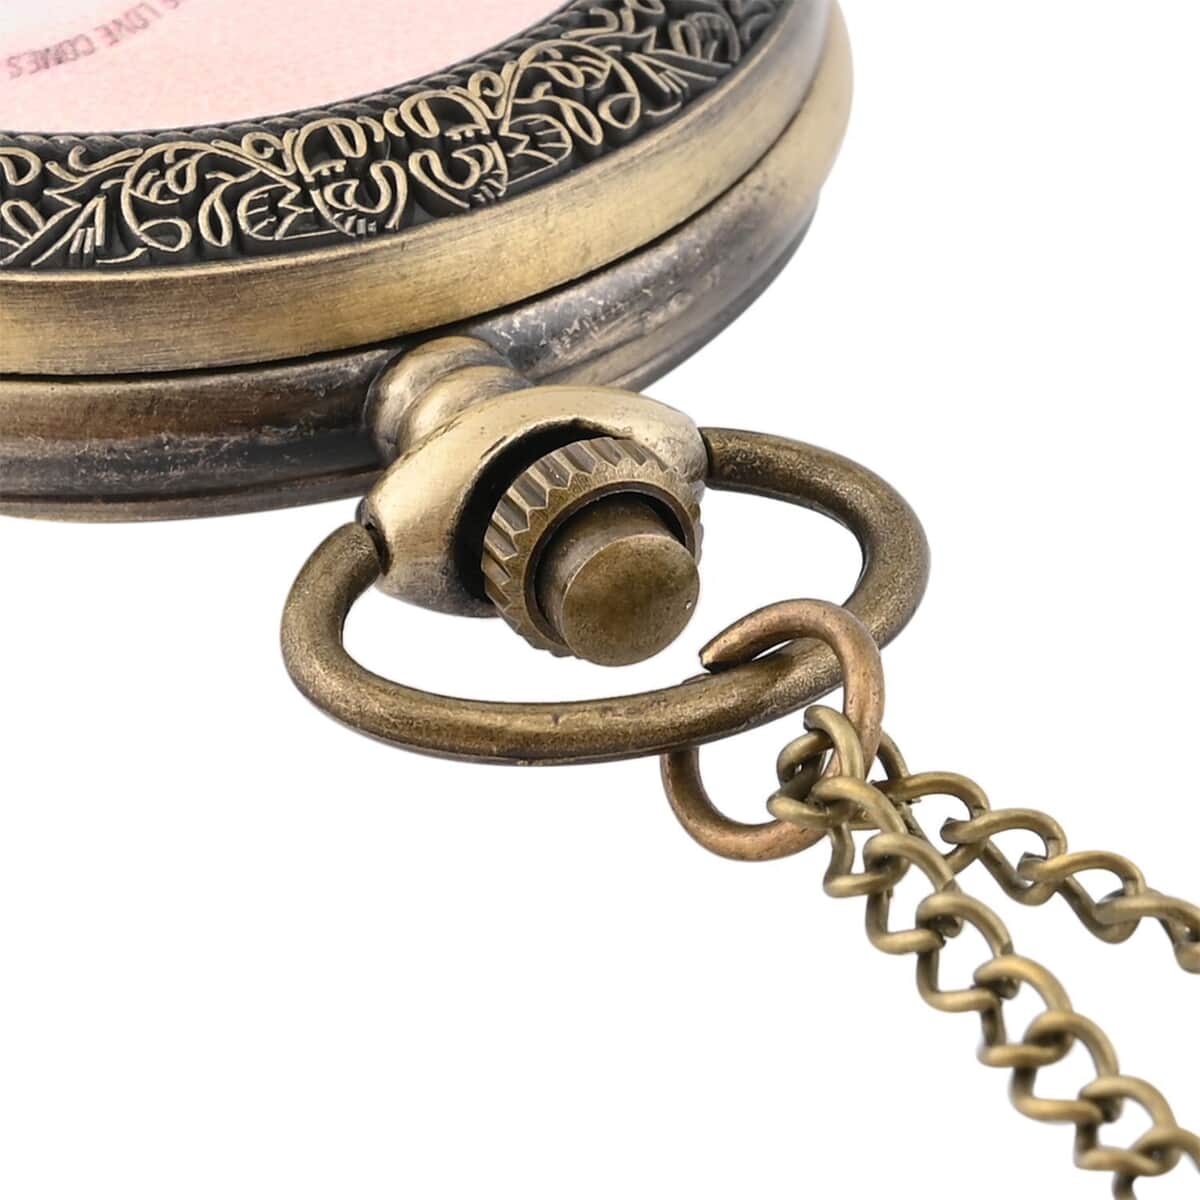 Strada Japanese Movement Nude Pink God is Love Pocket Watch with Chain in Antique bronze (31 Inches) image number 5